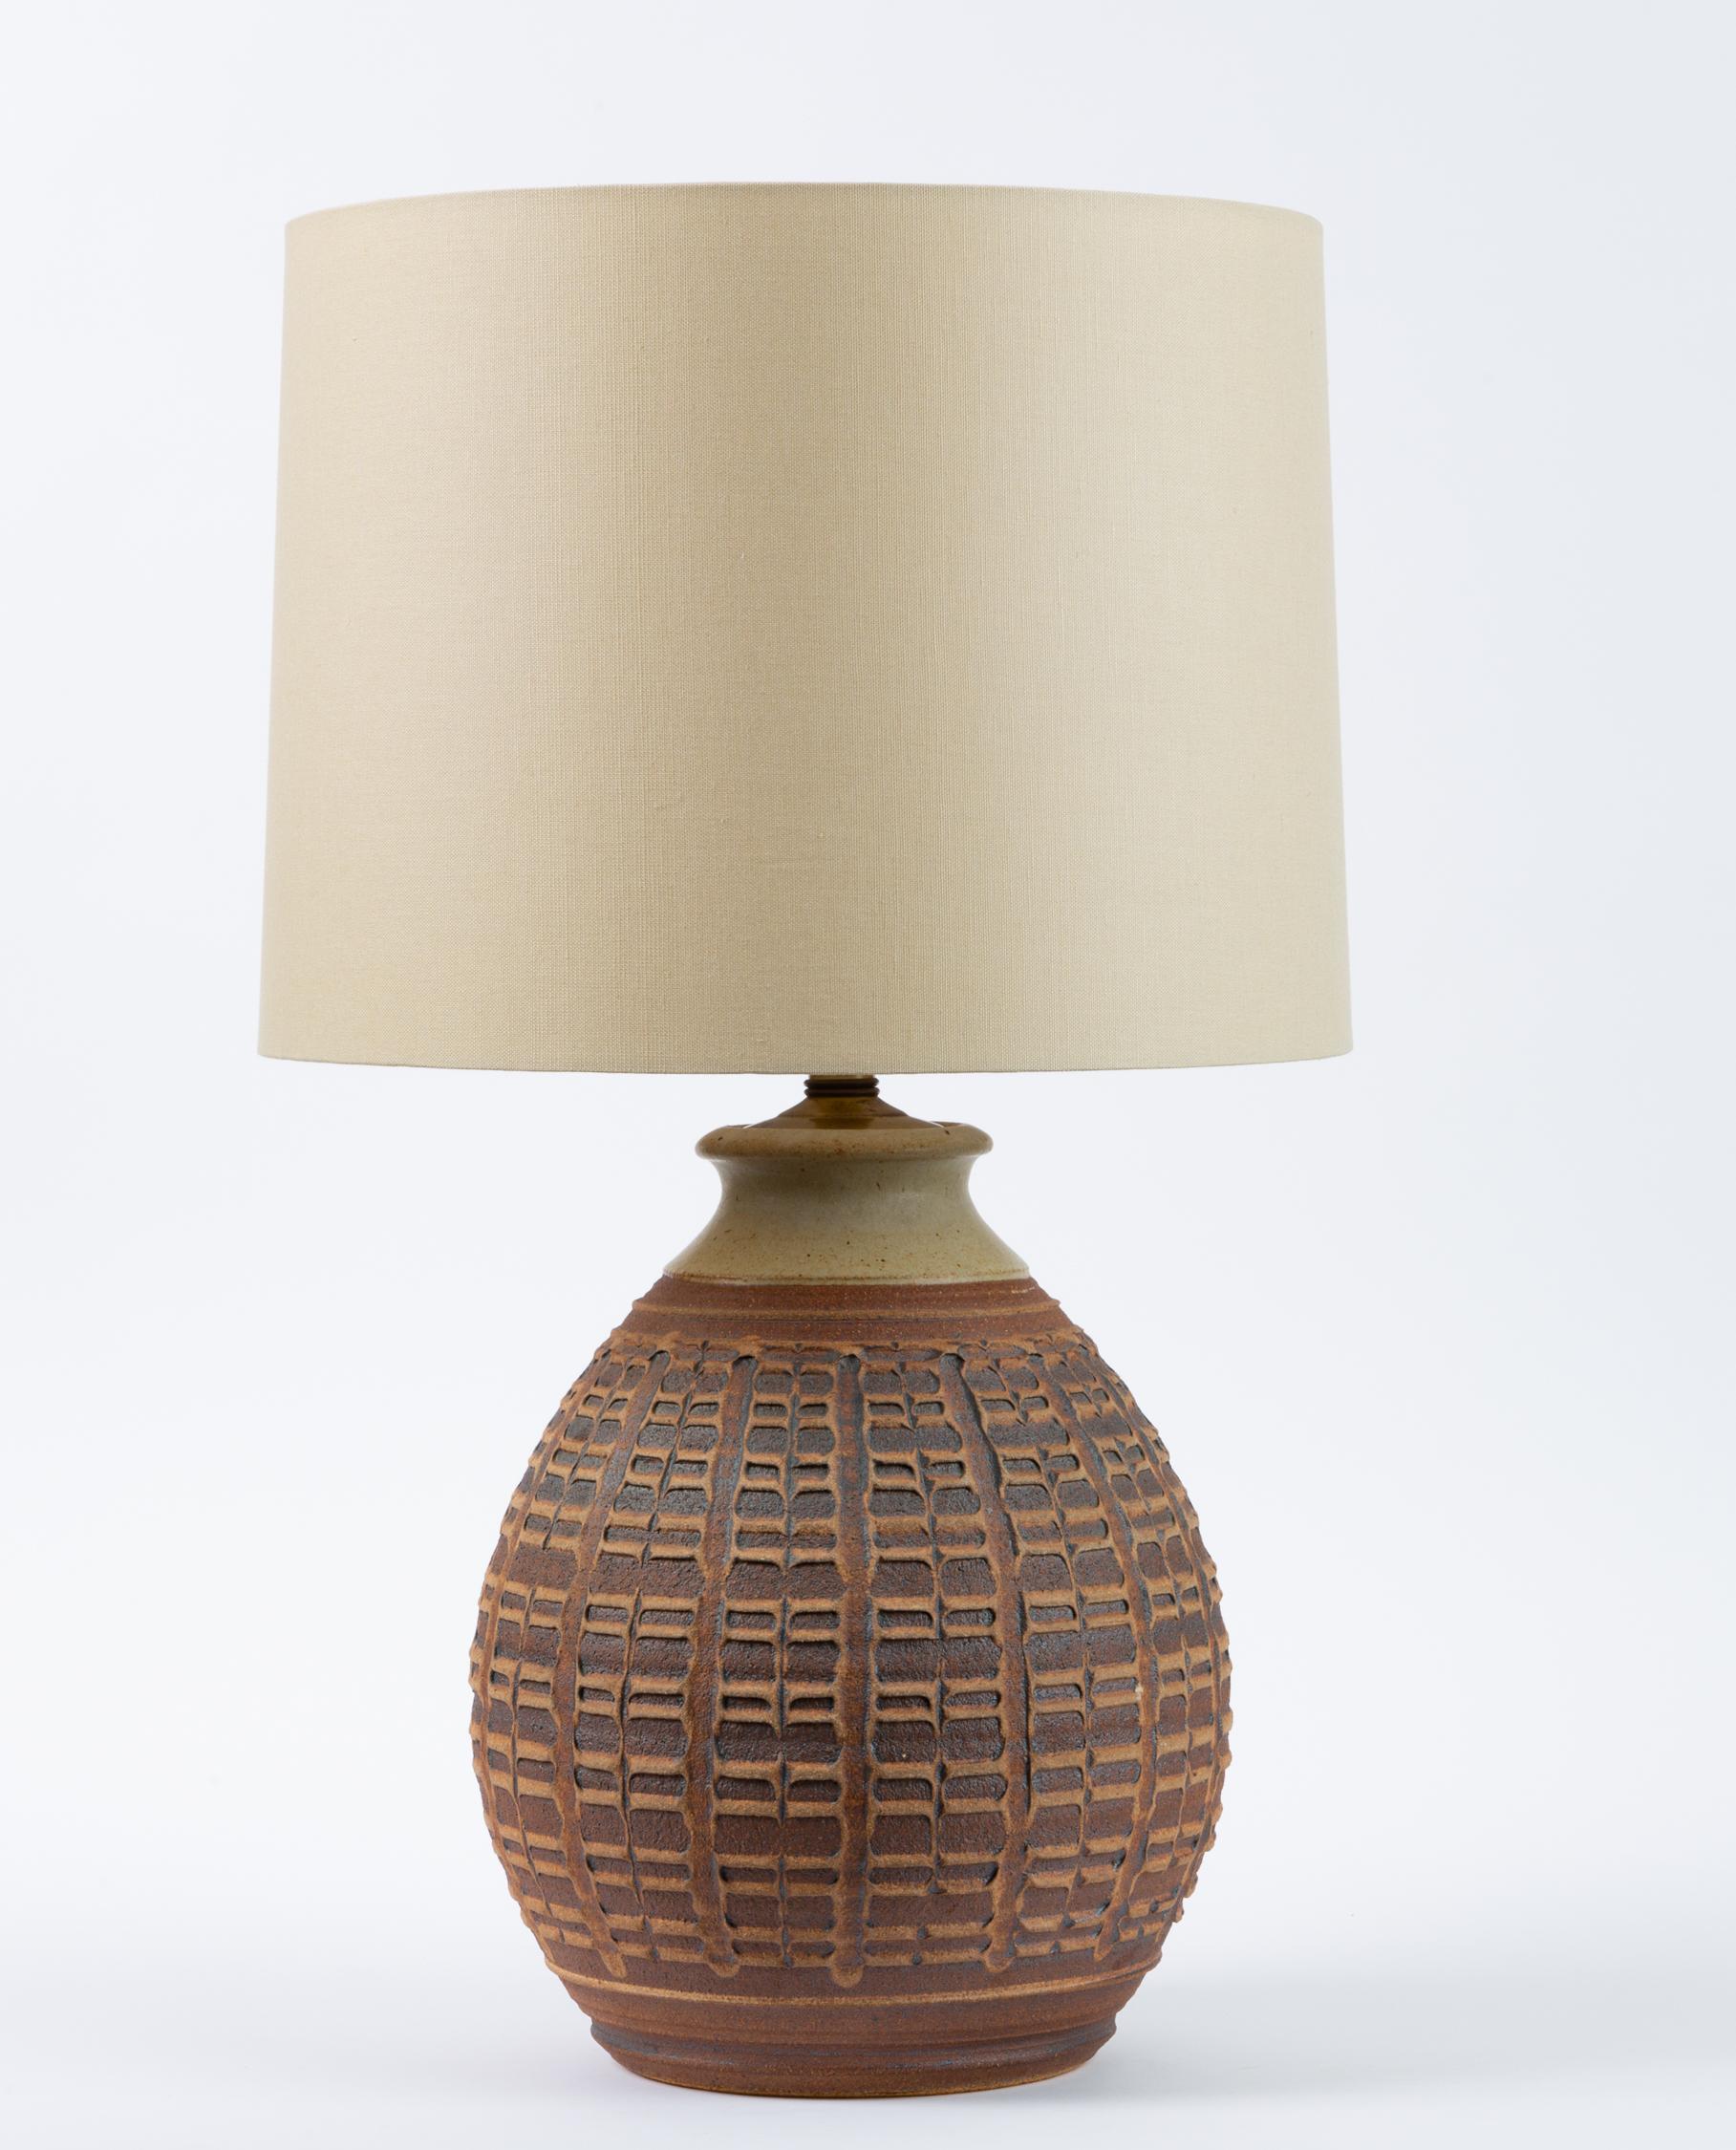 A large table lamp with a textured stoneware base by California ceramicist Bob Kinzie for Affiliated Craftsmen, the studio he founded in the 1970s. Kinzie’s work is distinguished by his ability to apply texture while his pieces were still on the